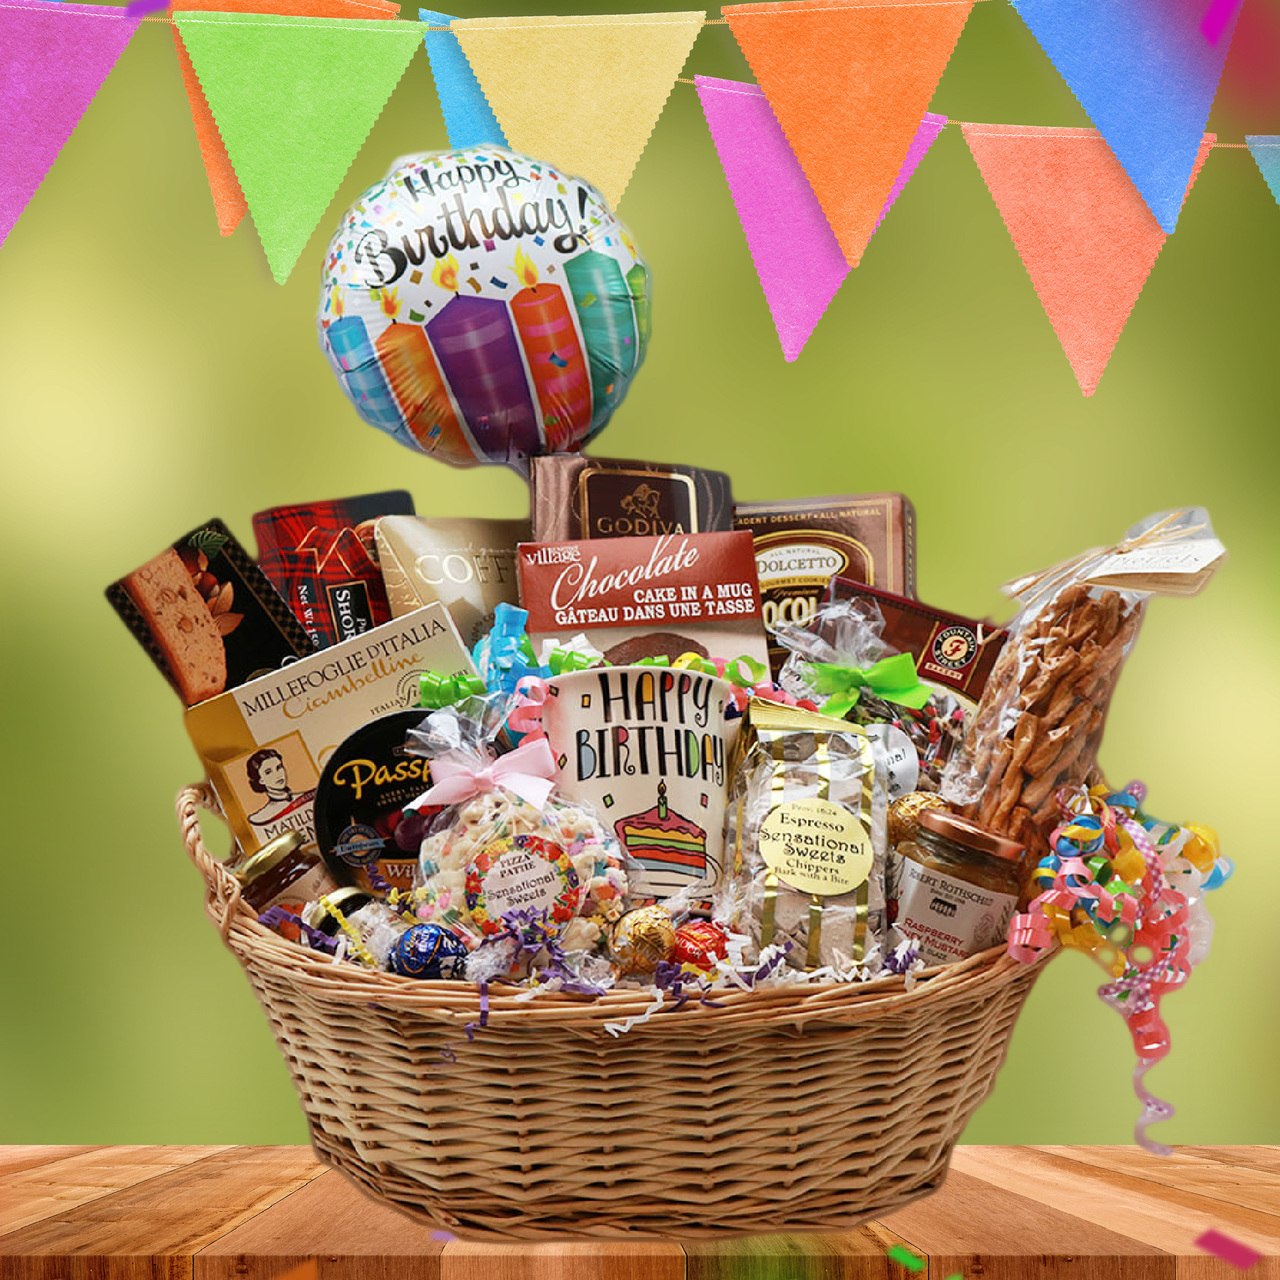 Tools Gift Basket for Father's Day, Birthdays, or Other Celebrations